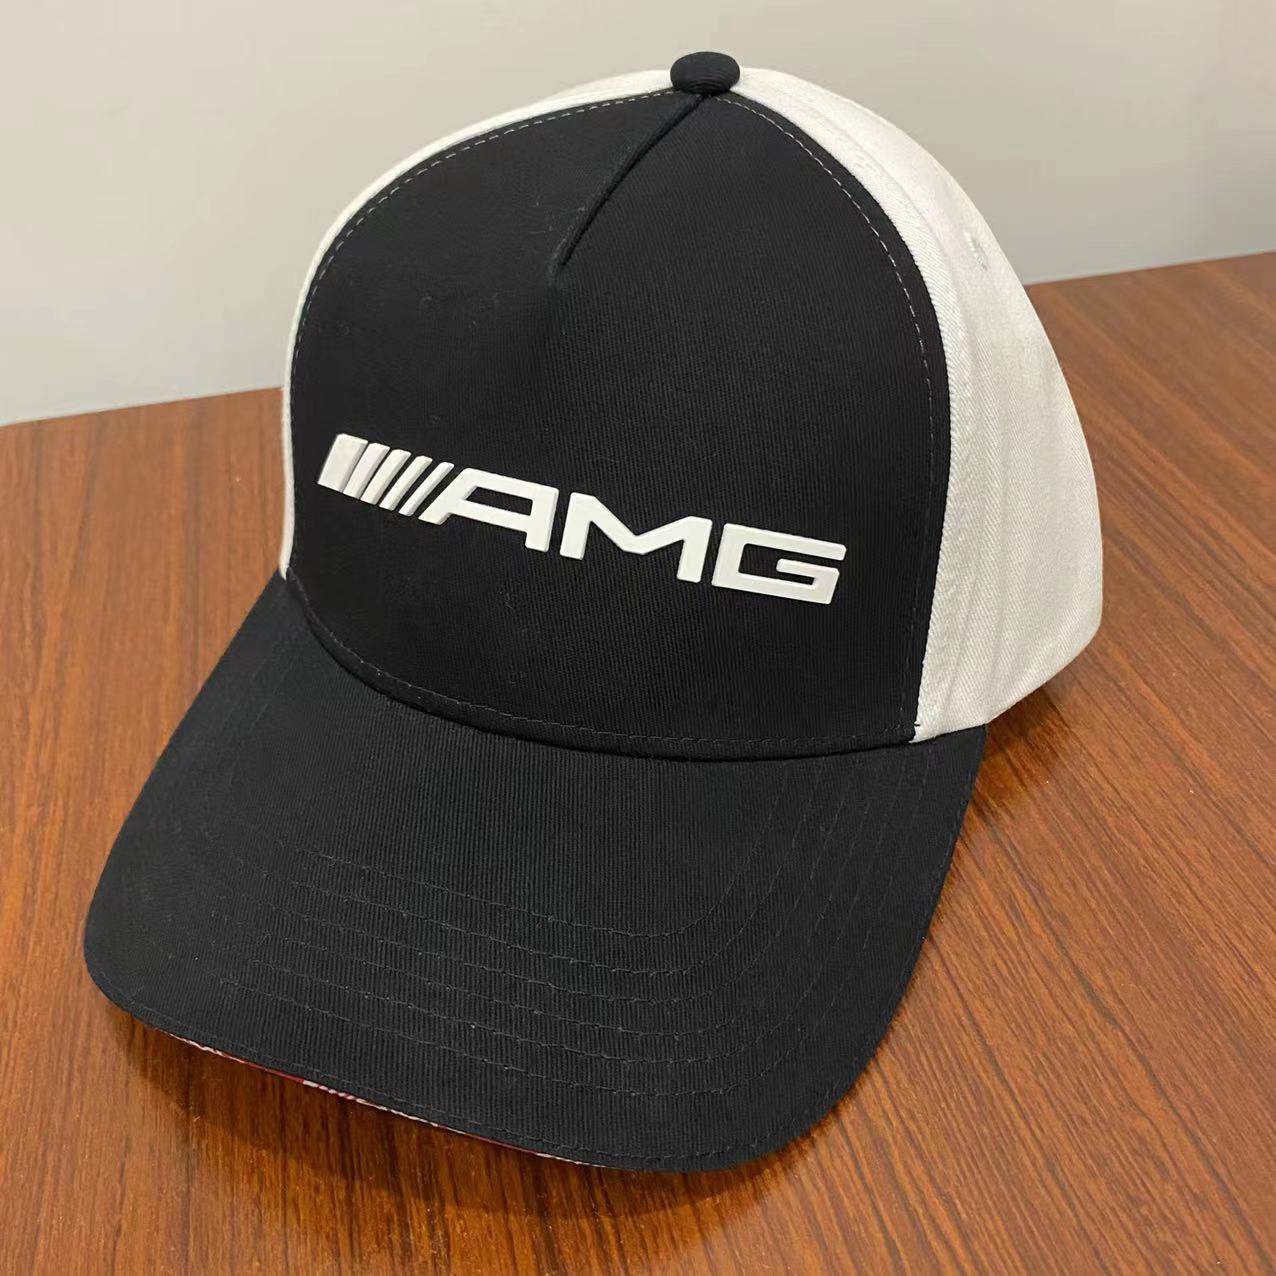 AMG Baseball hat 100% cotton with lining 56-58